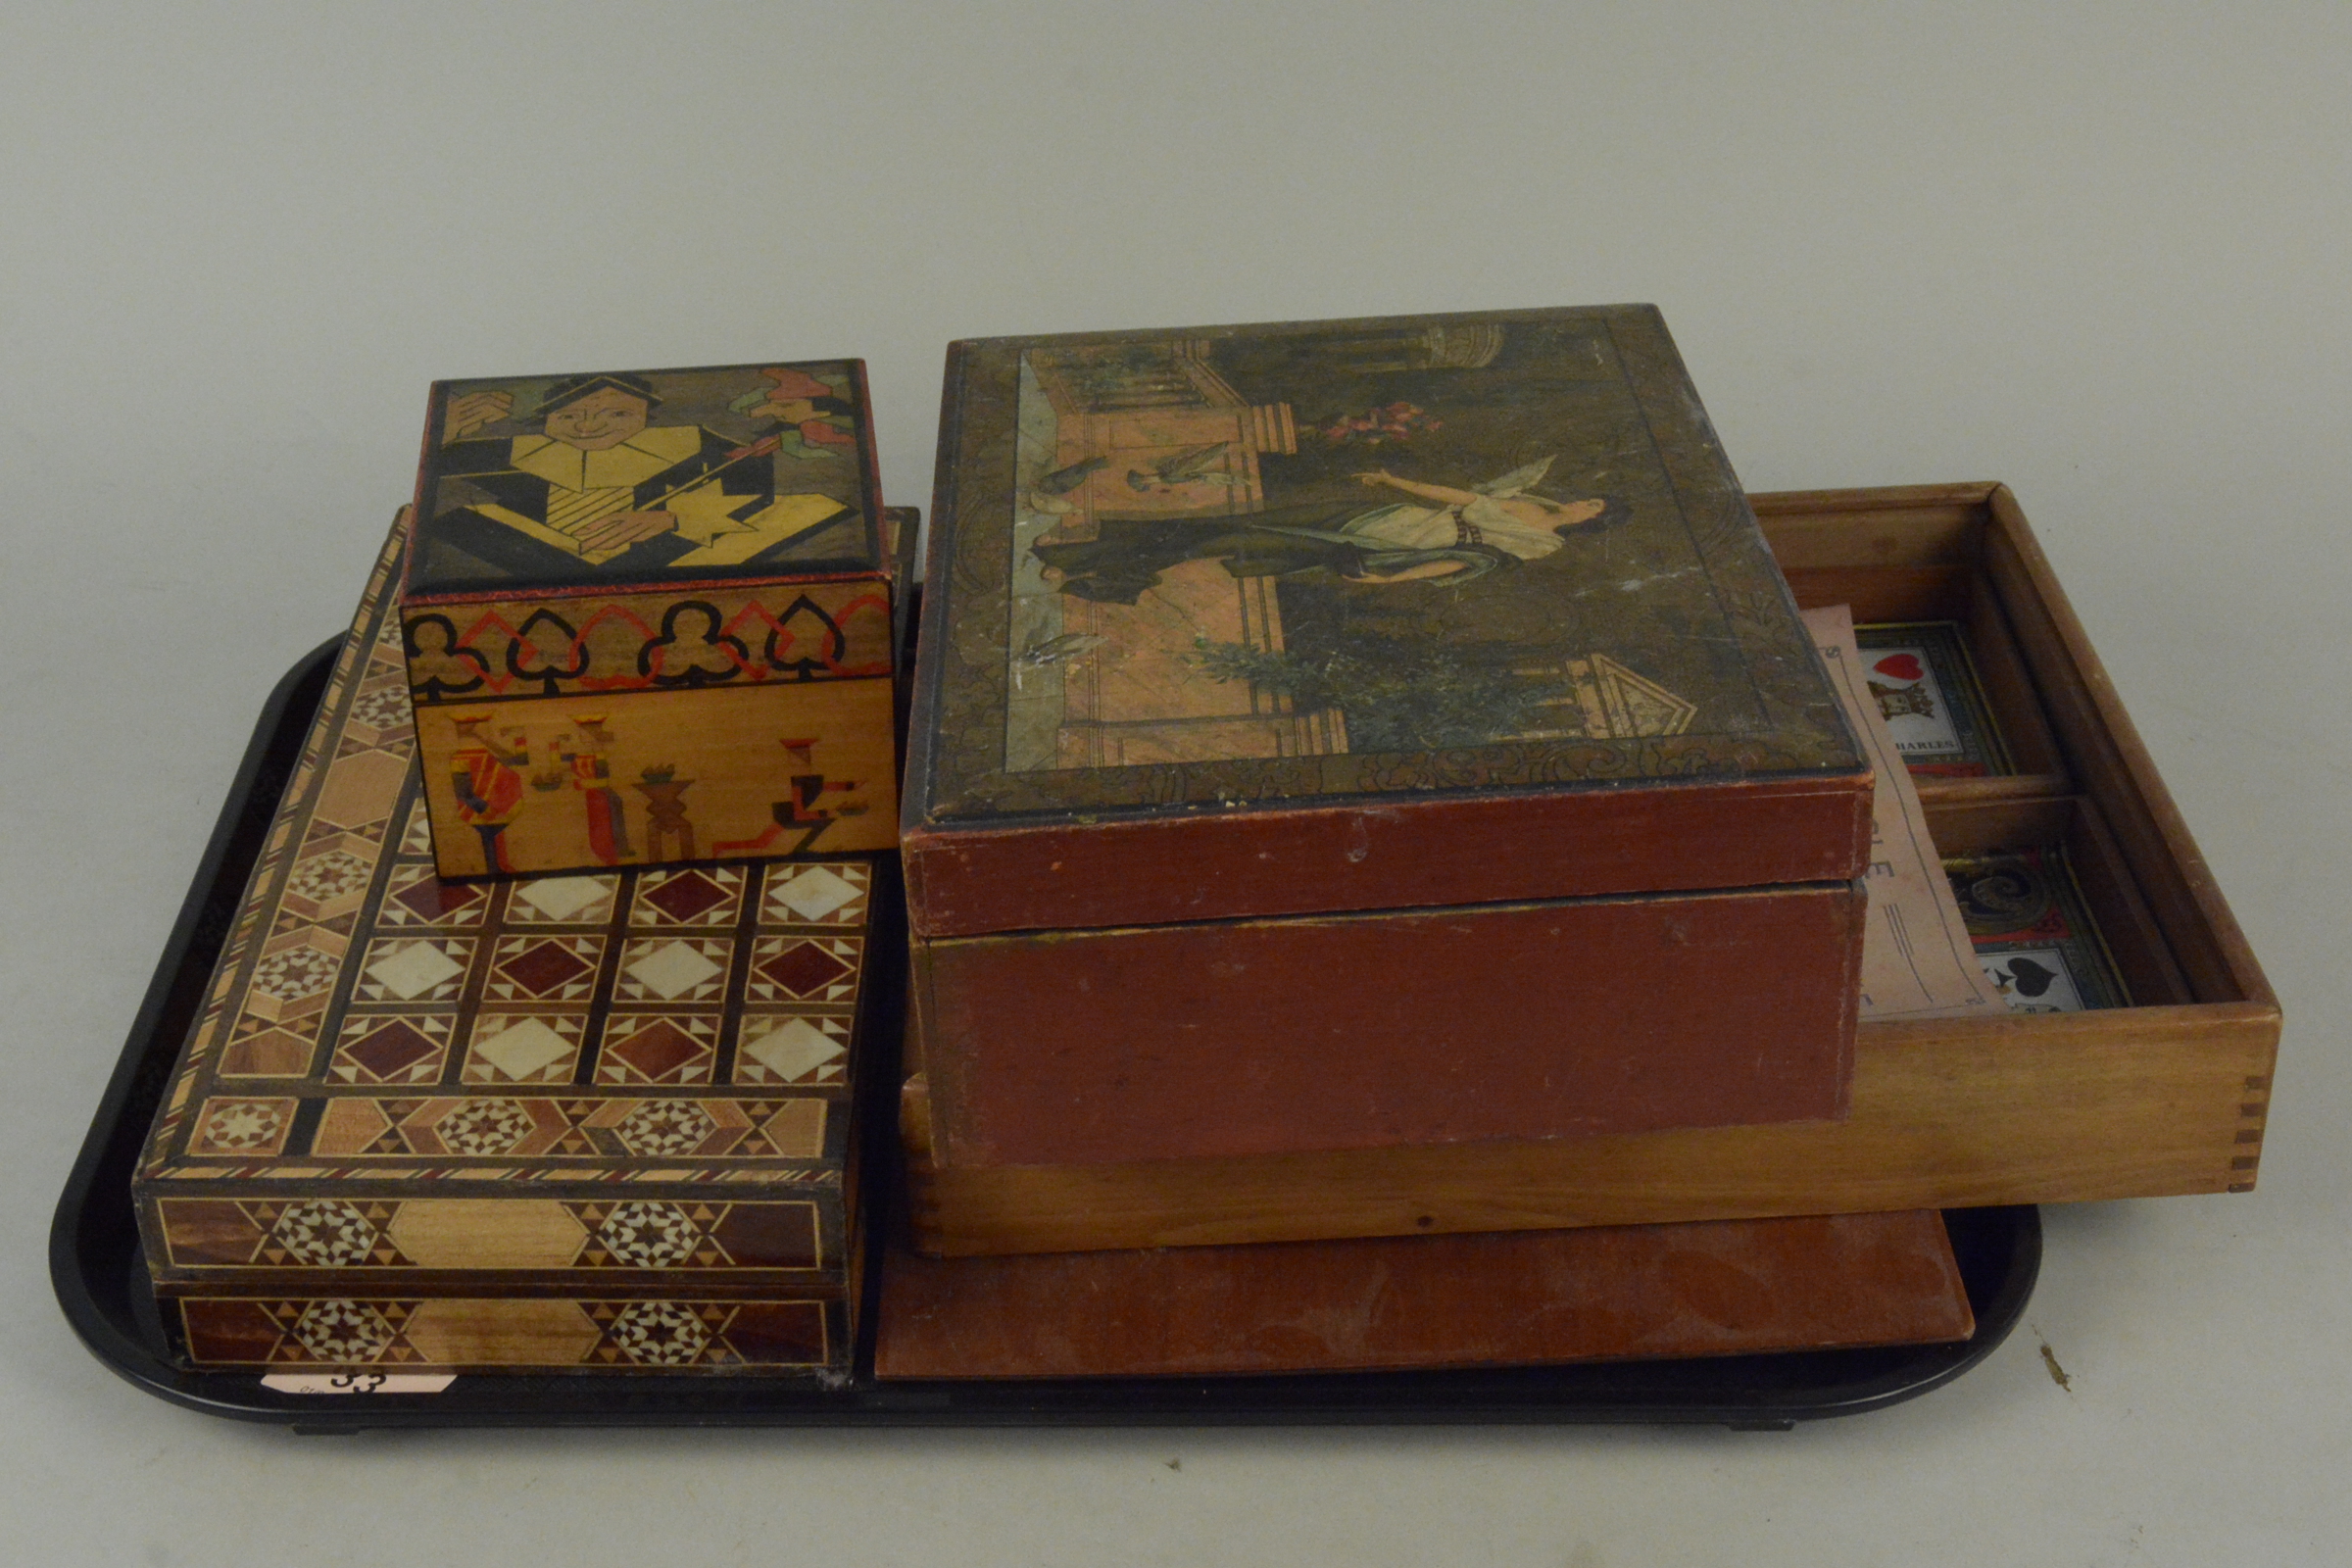 A Victorian era wooden box for the French card game 'Naine-Jaune' or 'Yellow Dwarf',